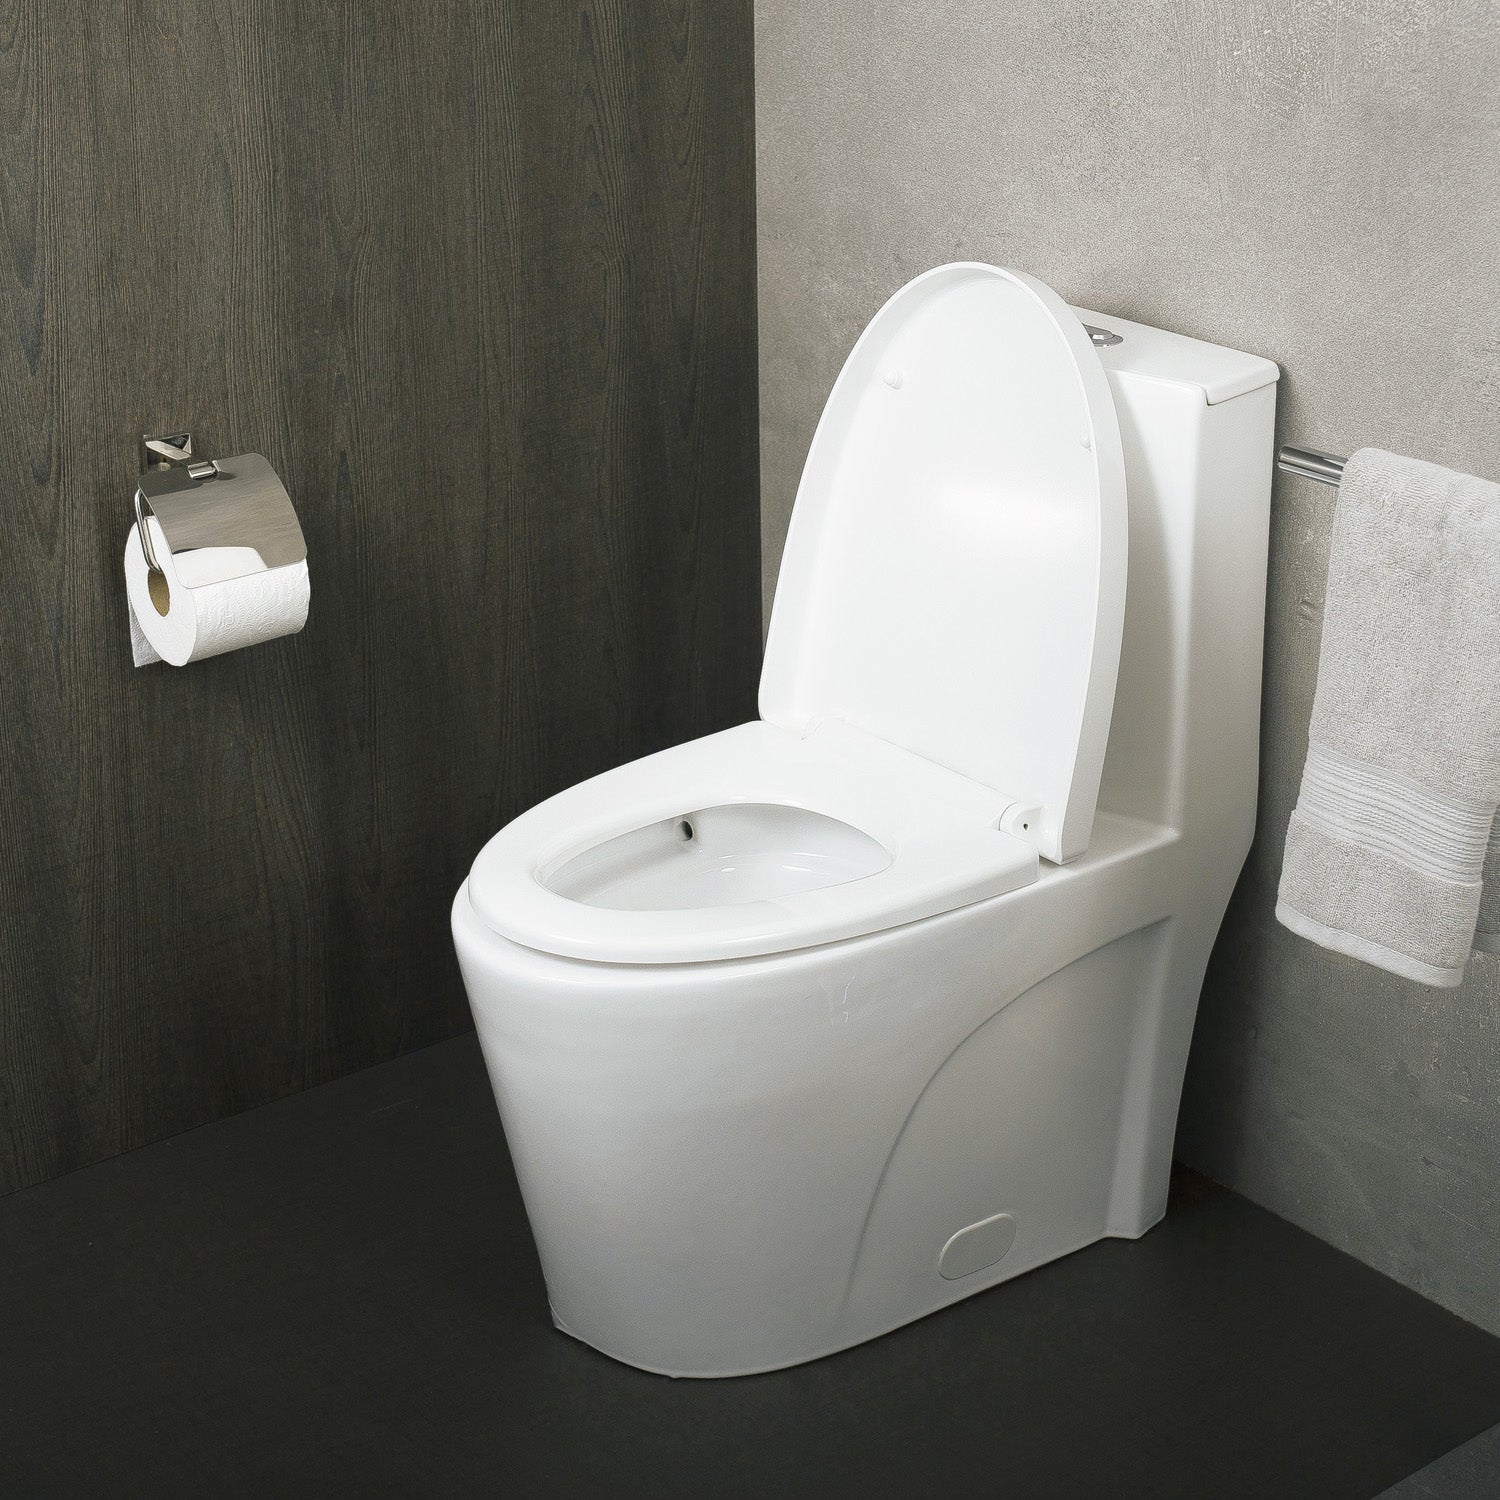 DAX One Piece Oval Toilet with Soft Closing Seat and Dual Flush High-Efficiency, Porcelain, White Finish, Height 31 Inches (BSN-CL12011)